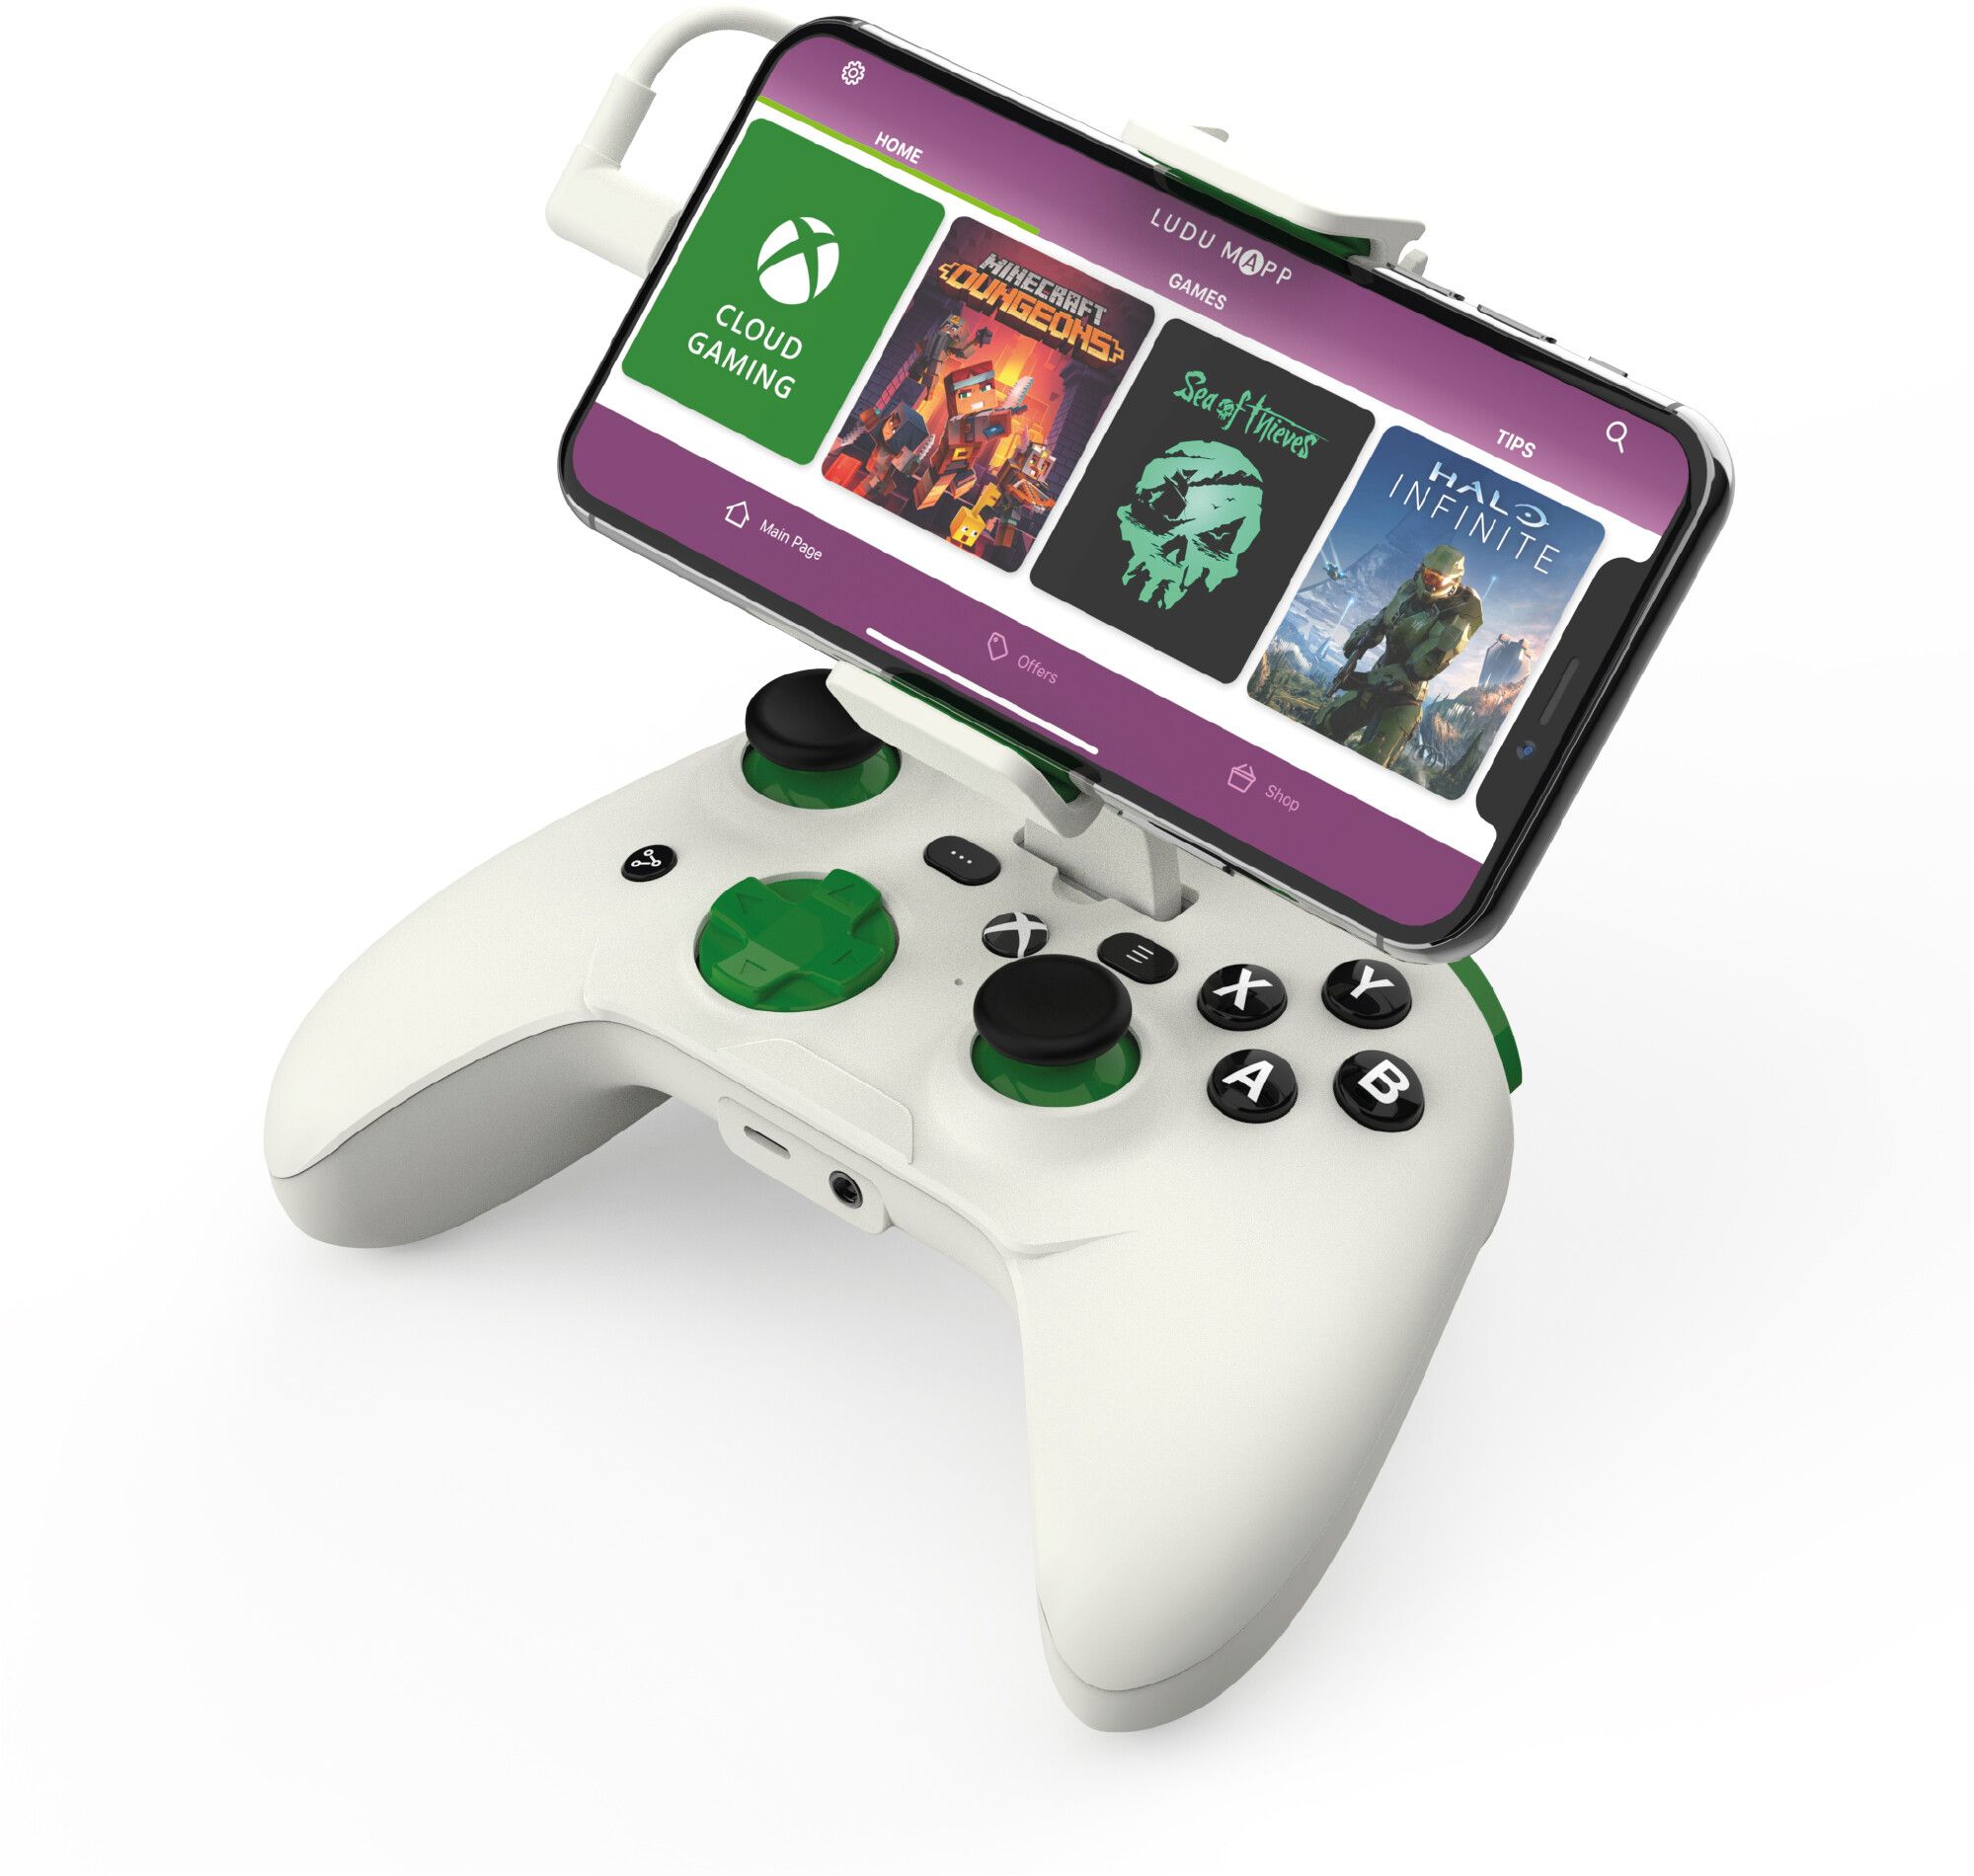 RiotPWR Cloud Gaming Controller for iOS